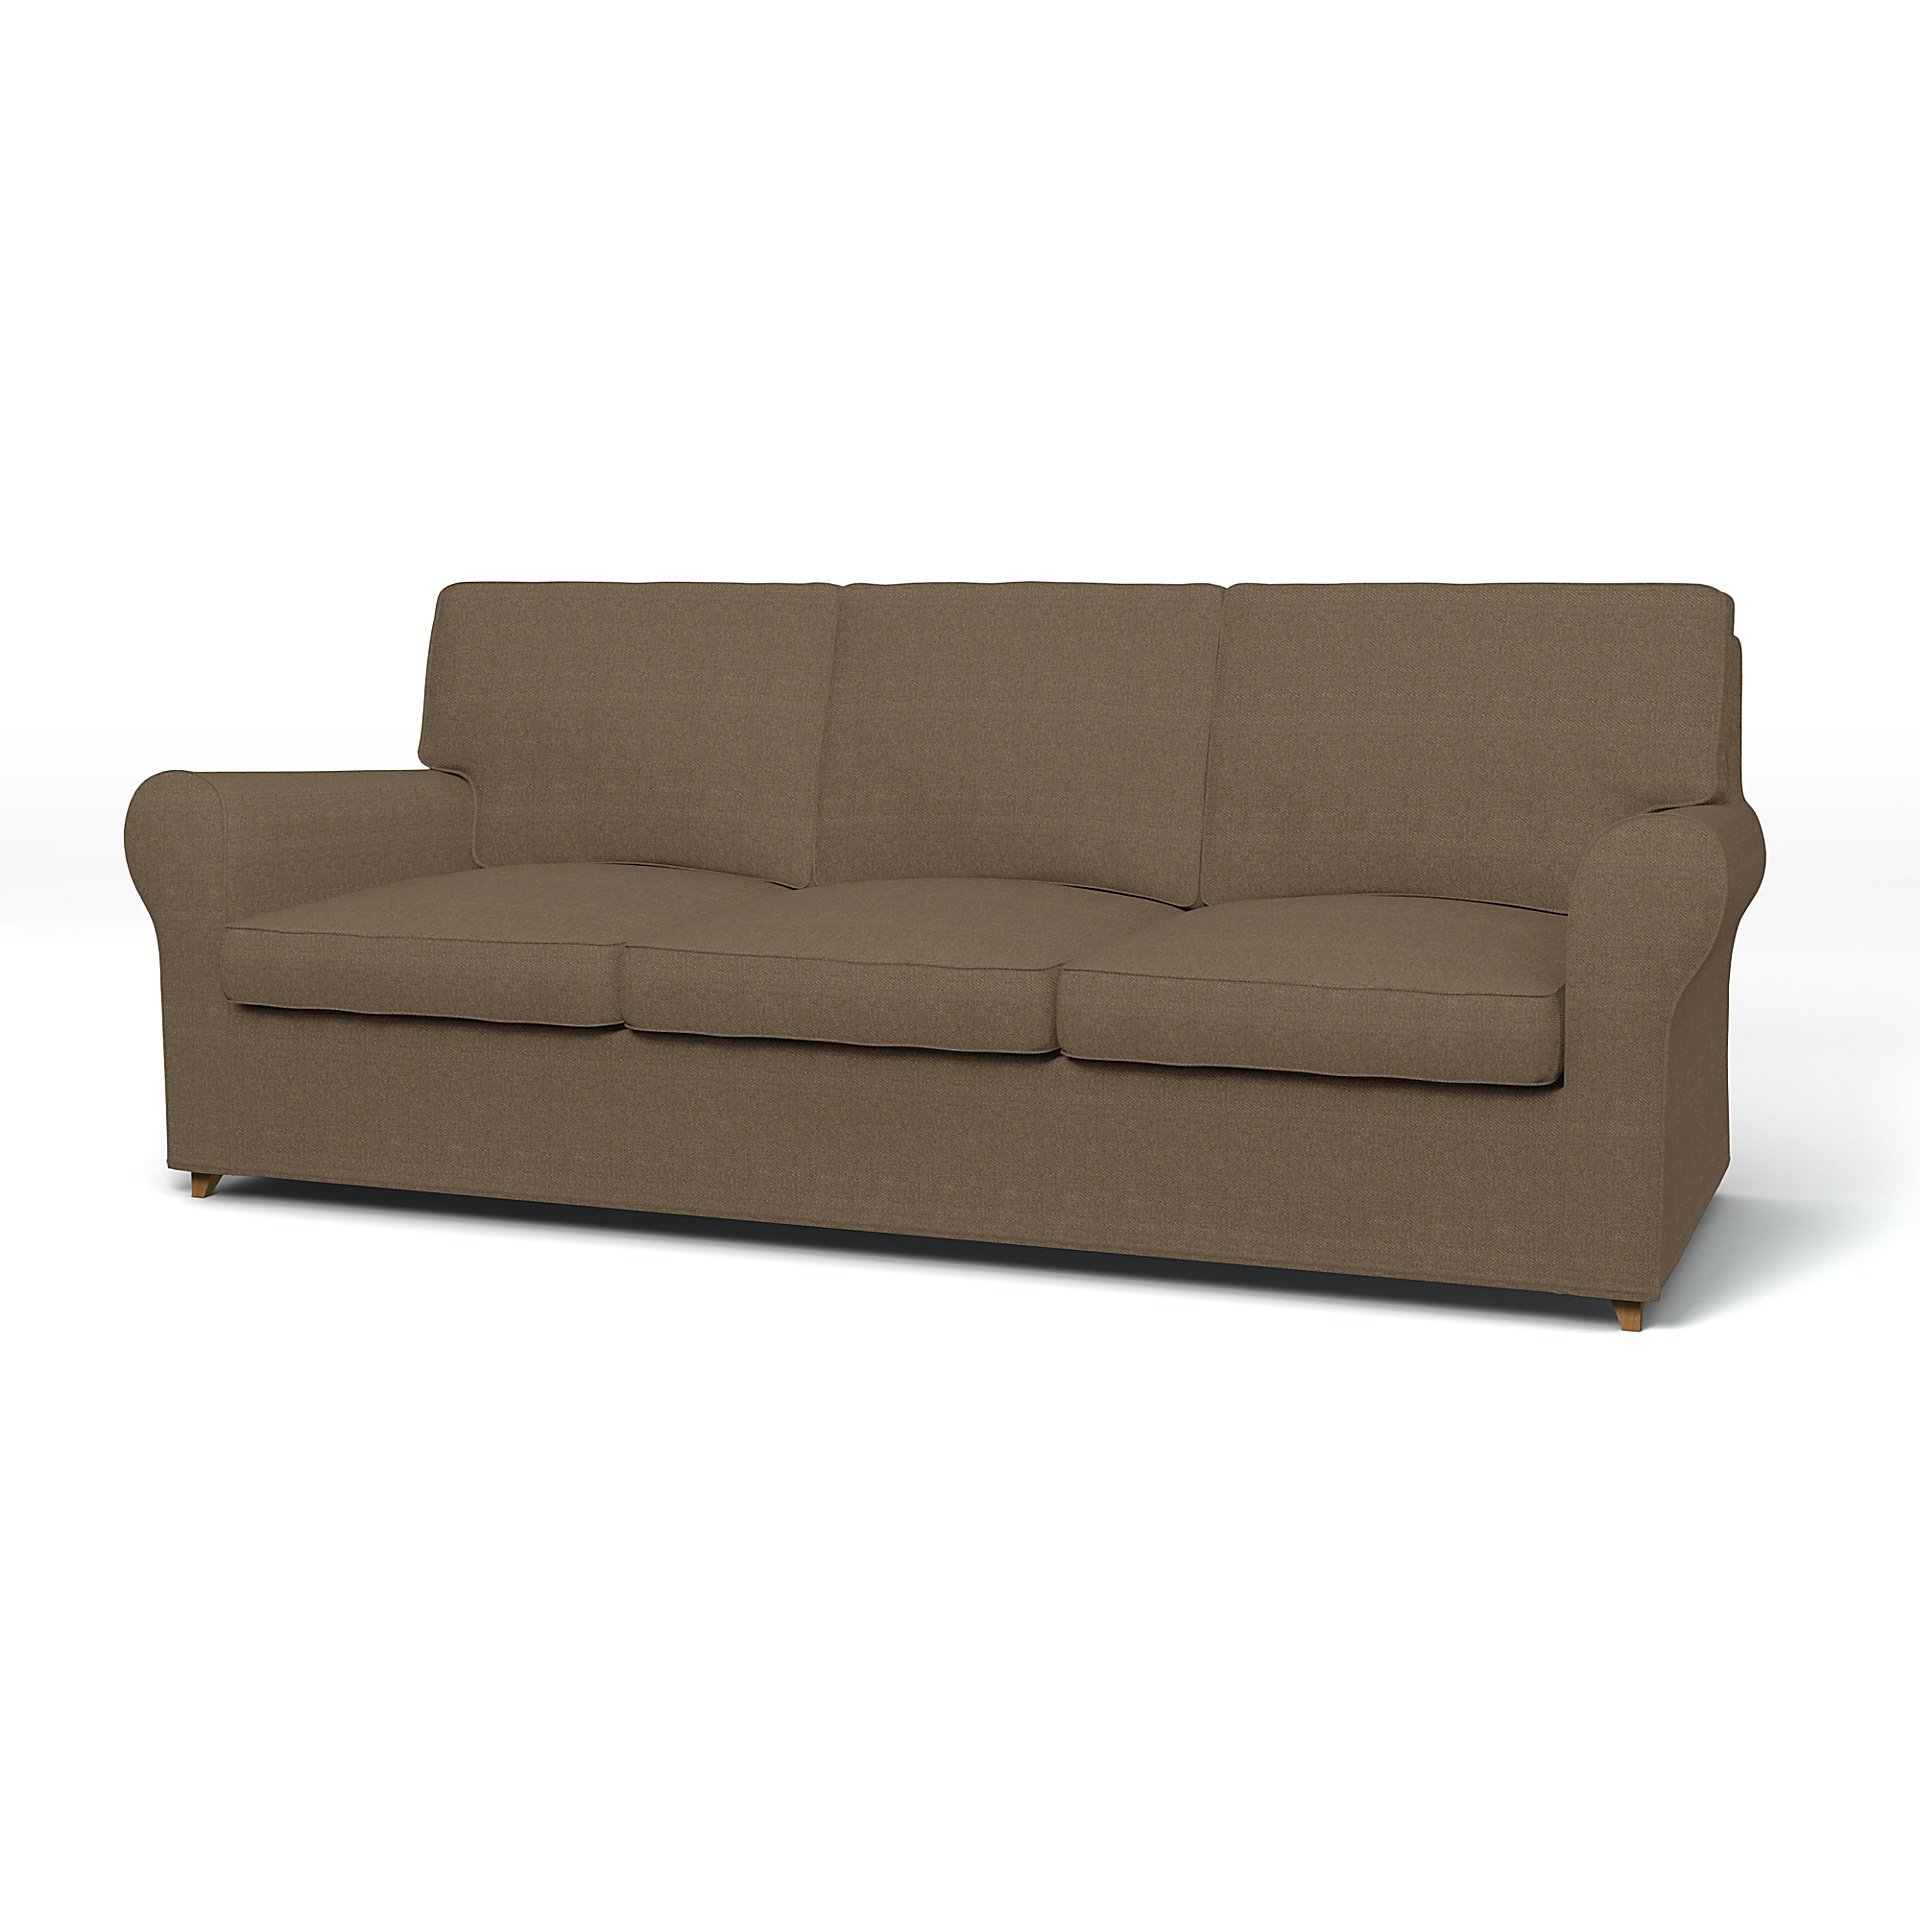 IKEA - Angby 3 Seater Sofa Cover, Dark Taupe, Boucle & Texture - Bemz